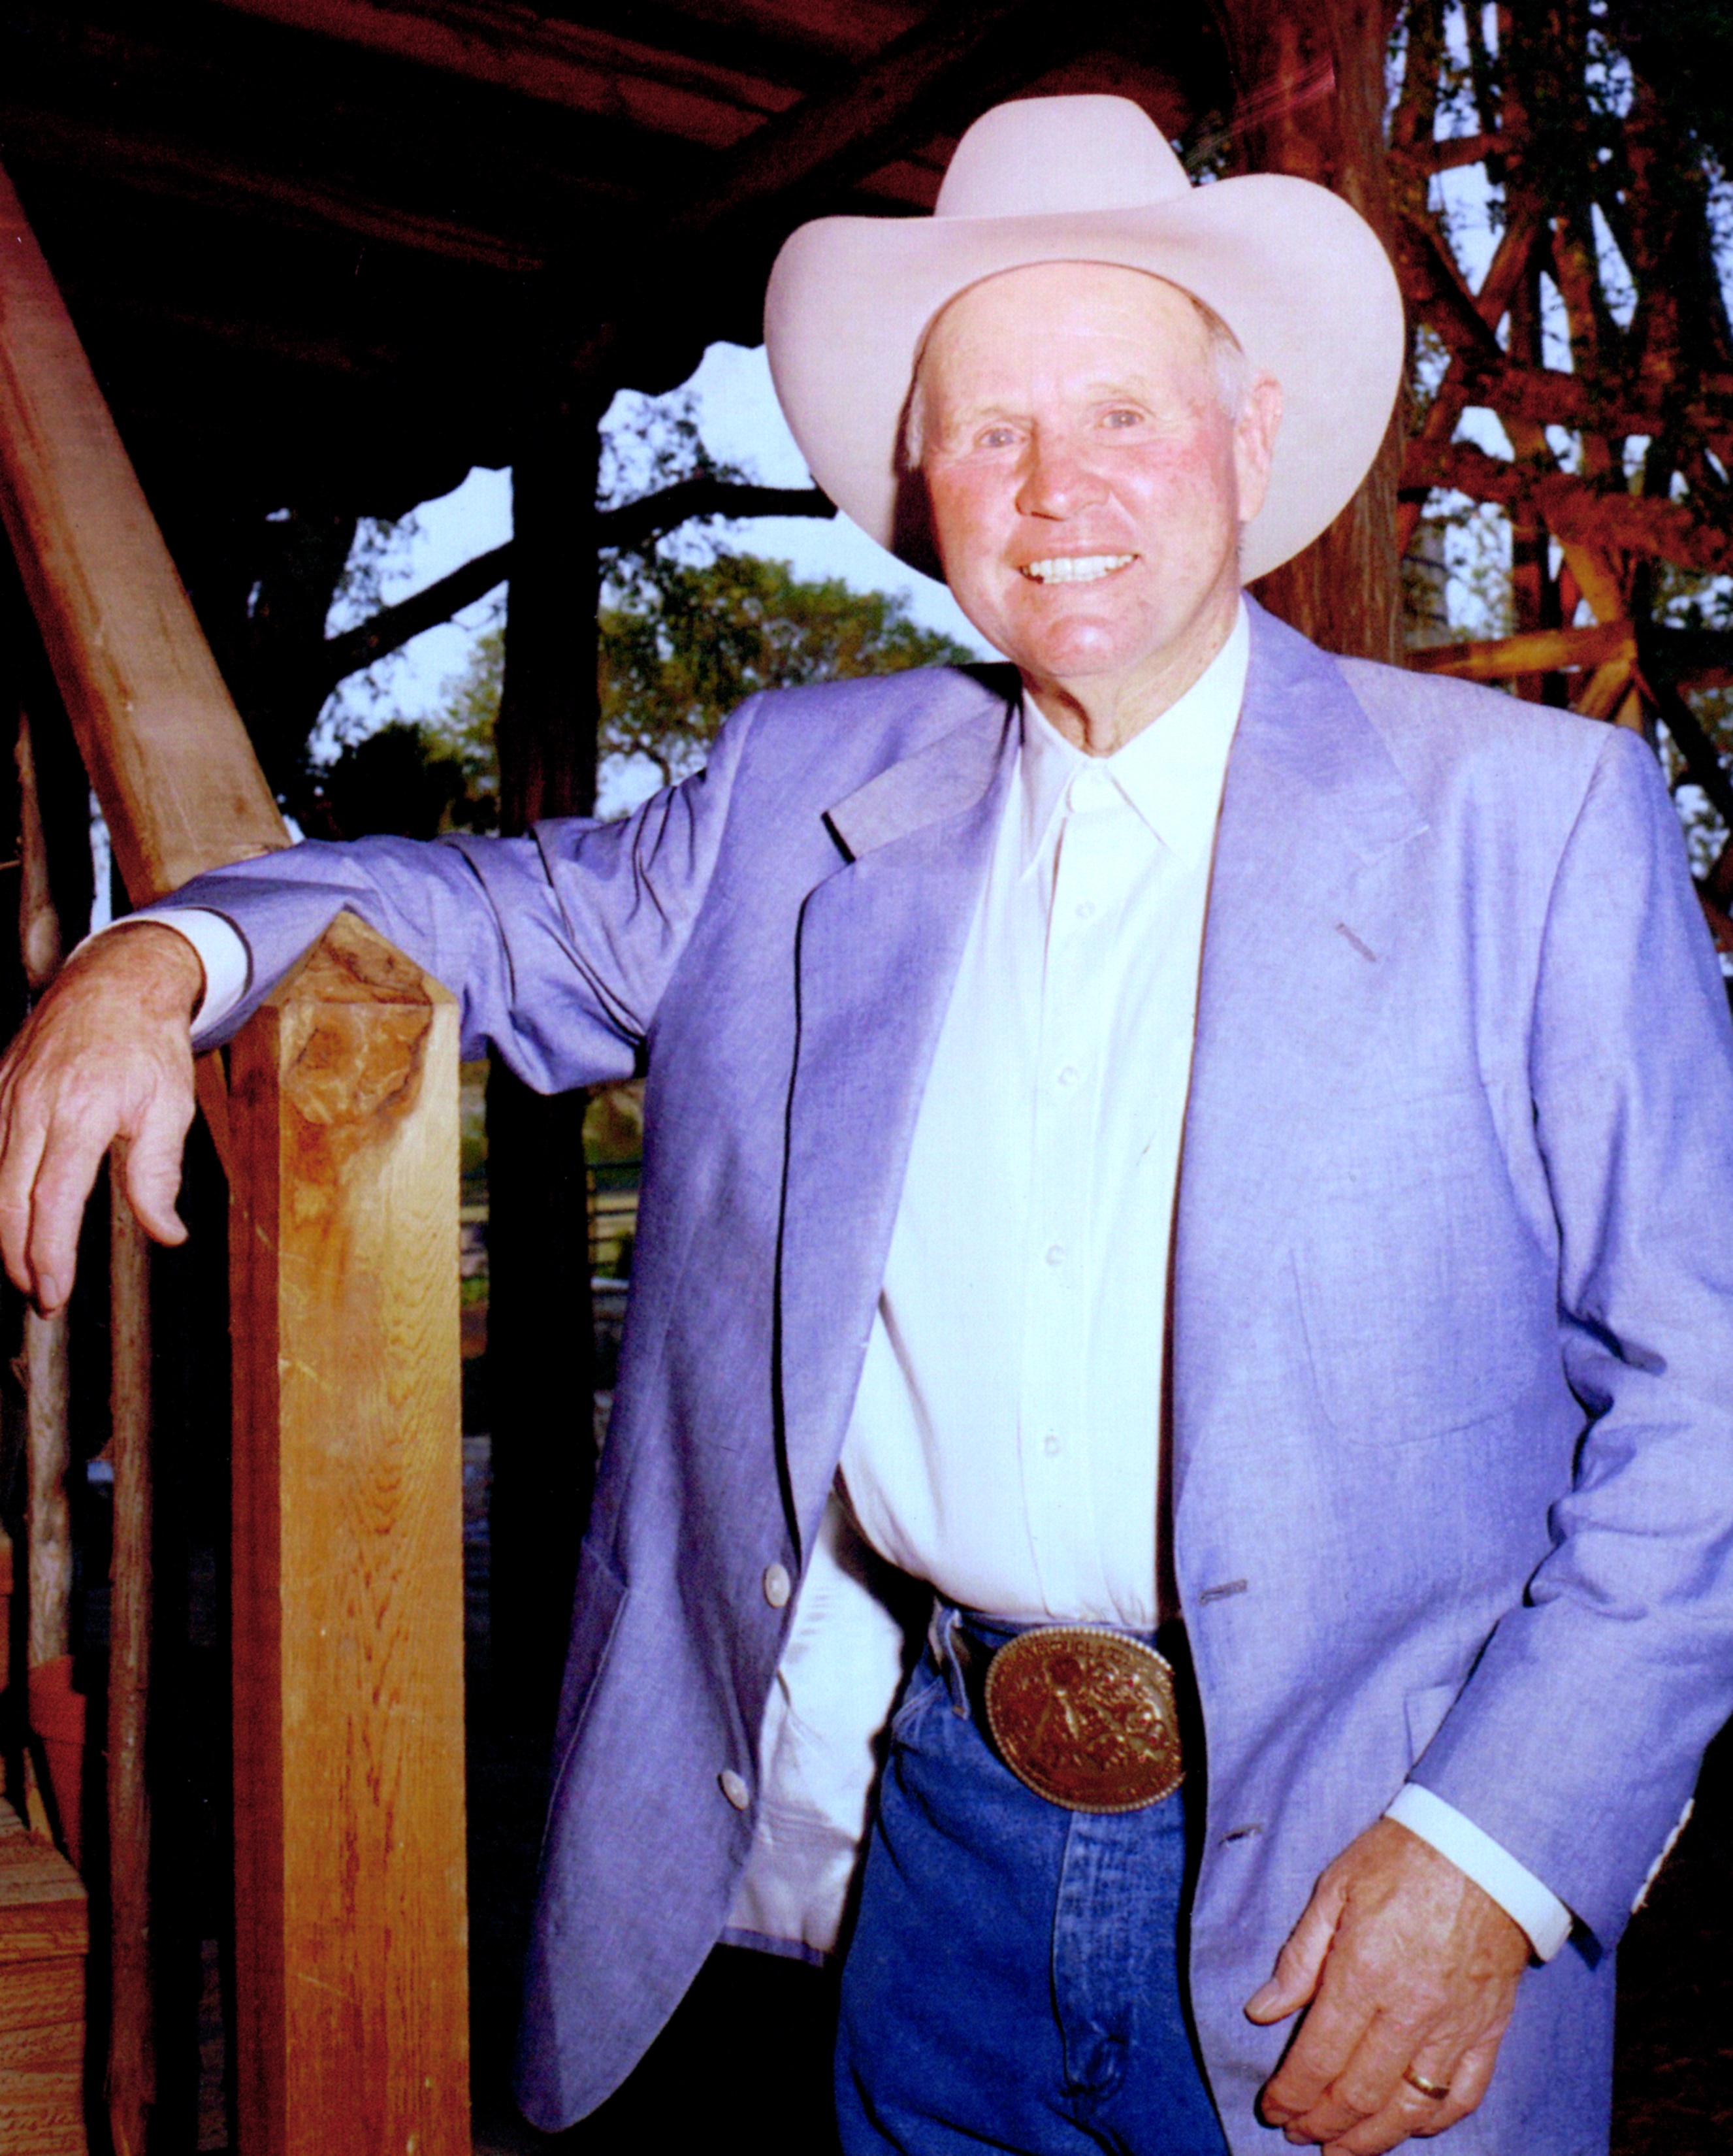 Buster Welch Statue Ready for Fort Worth Unveiling - Quarter Horse News